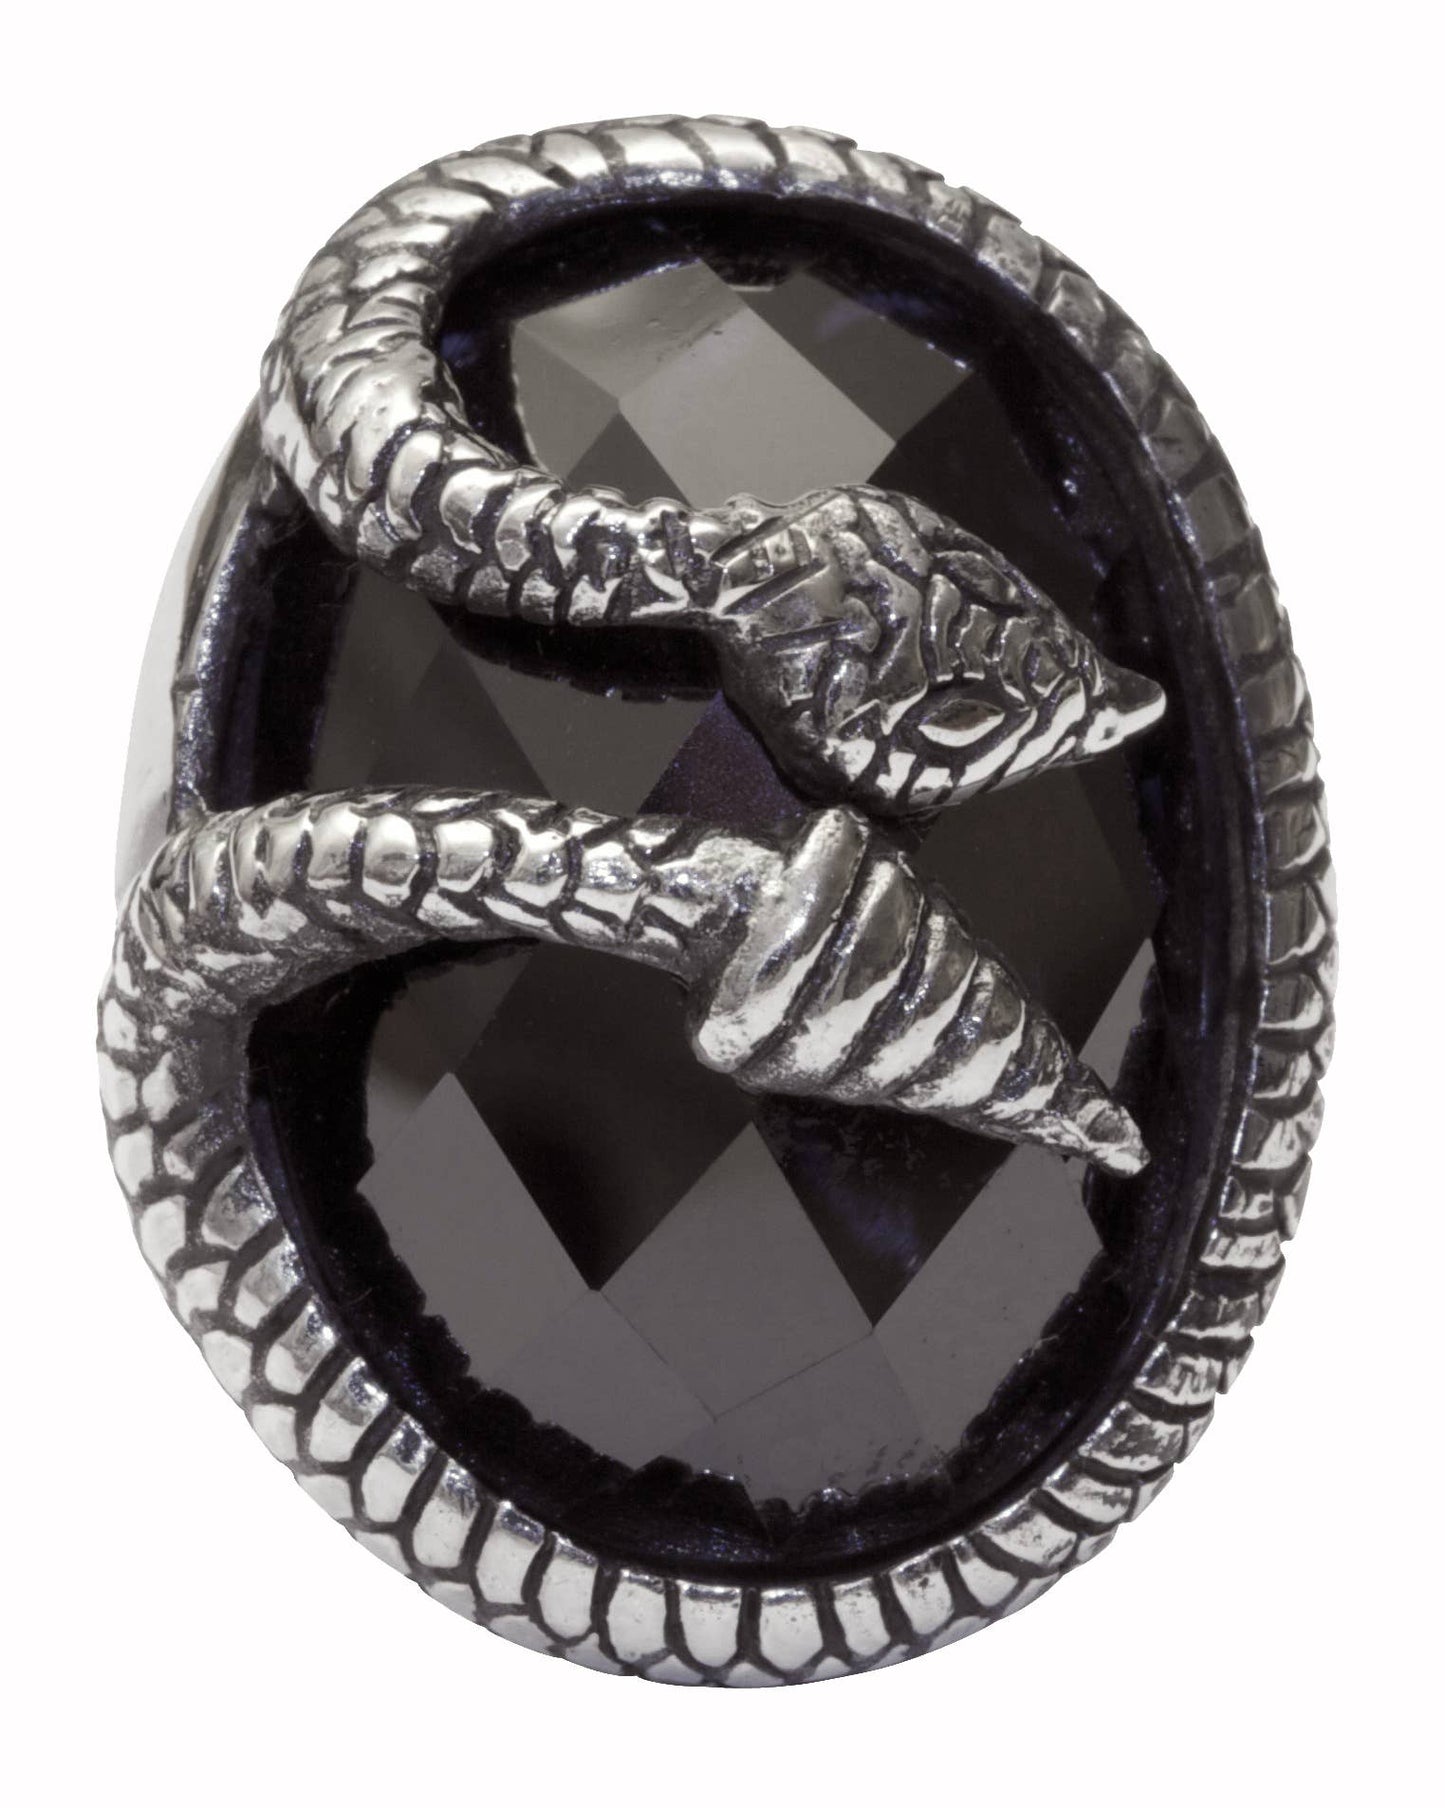 Giant Snake Ring - Sterling Silver and Black CZ